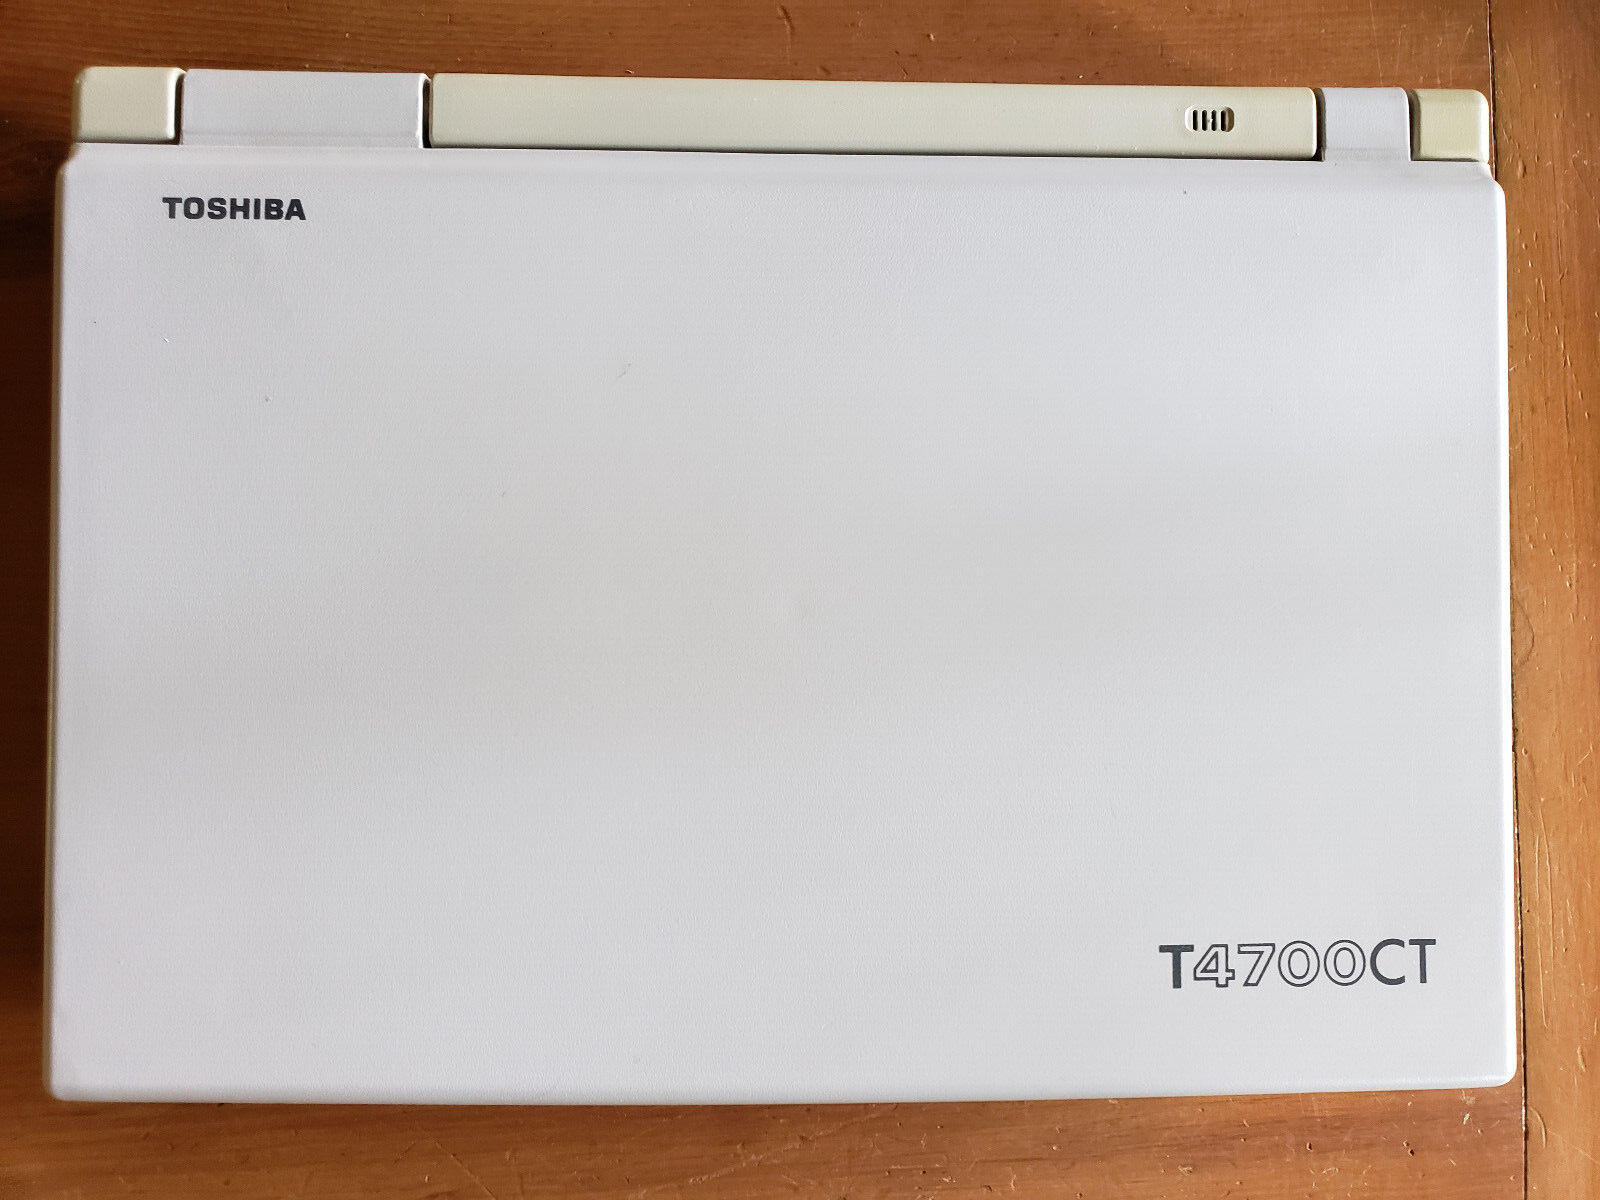 Toshiba T4700CT Vintage Untested for Parts/Repair